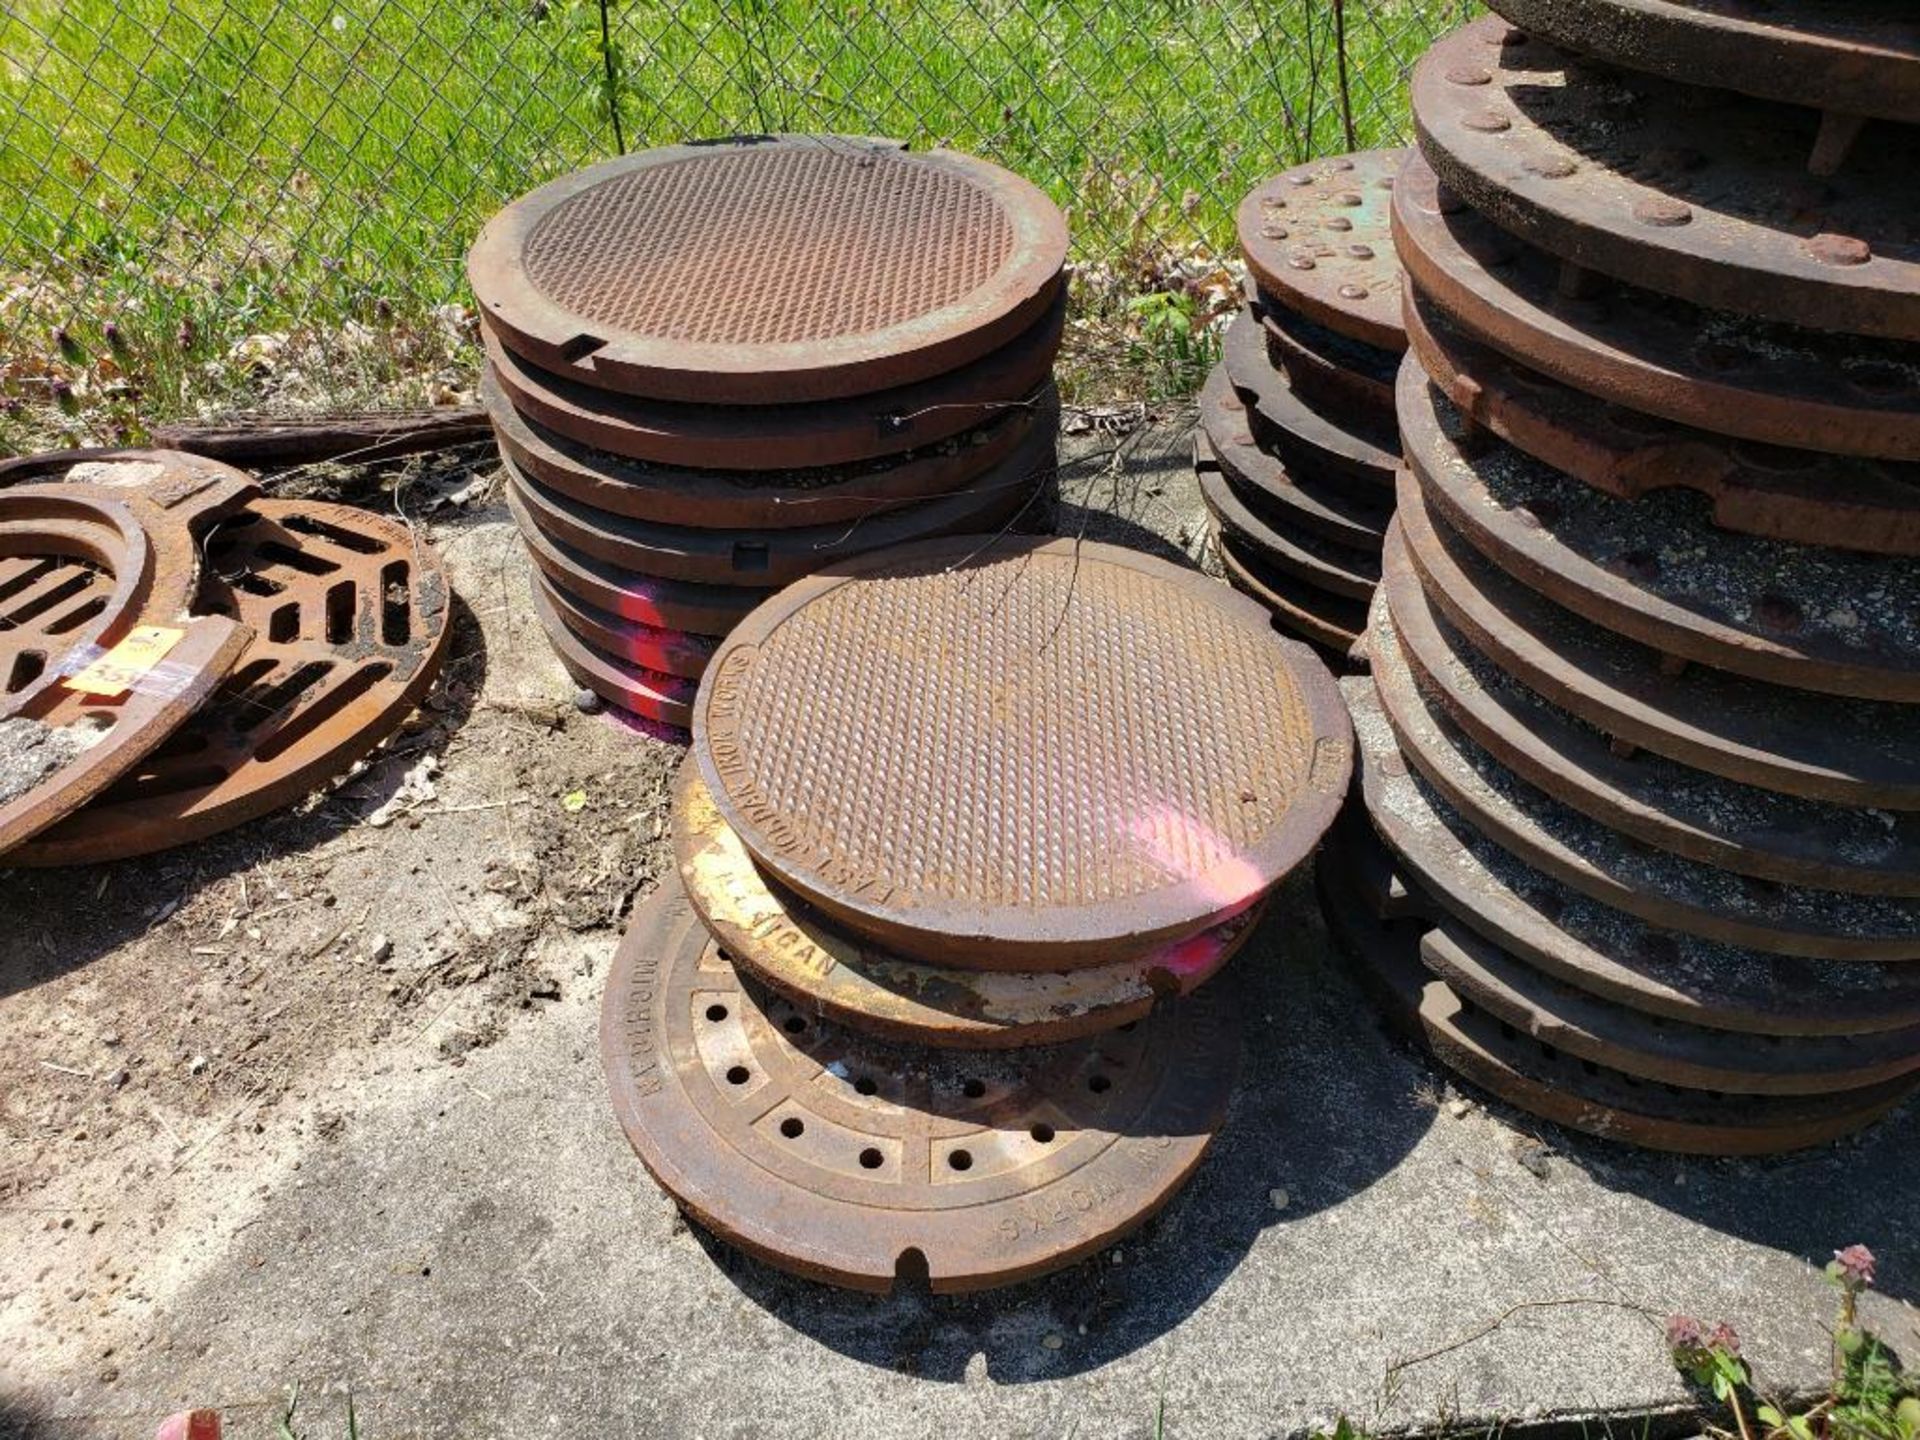 Assorted man hole covers. (units with pink marking are NOT included in lot) - Image 2 of 5